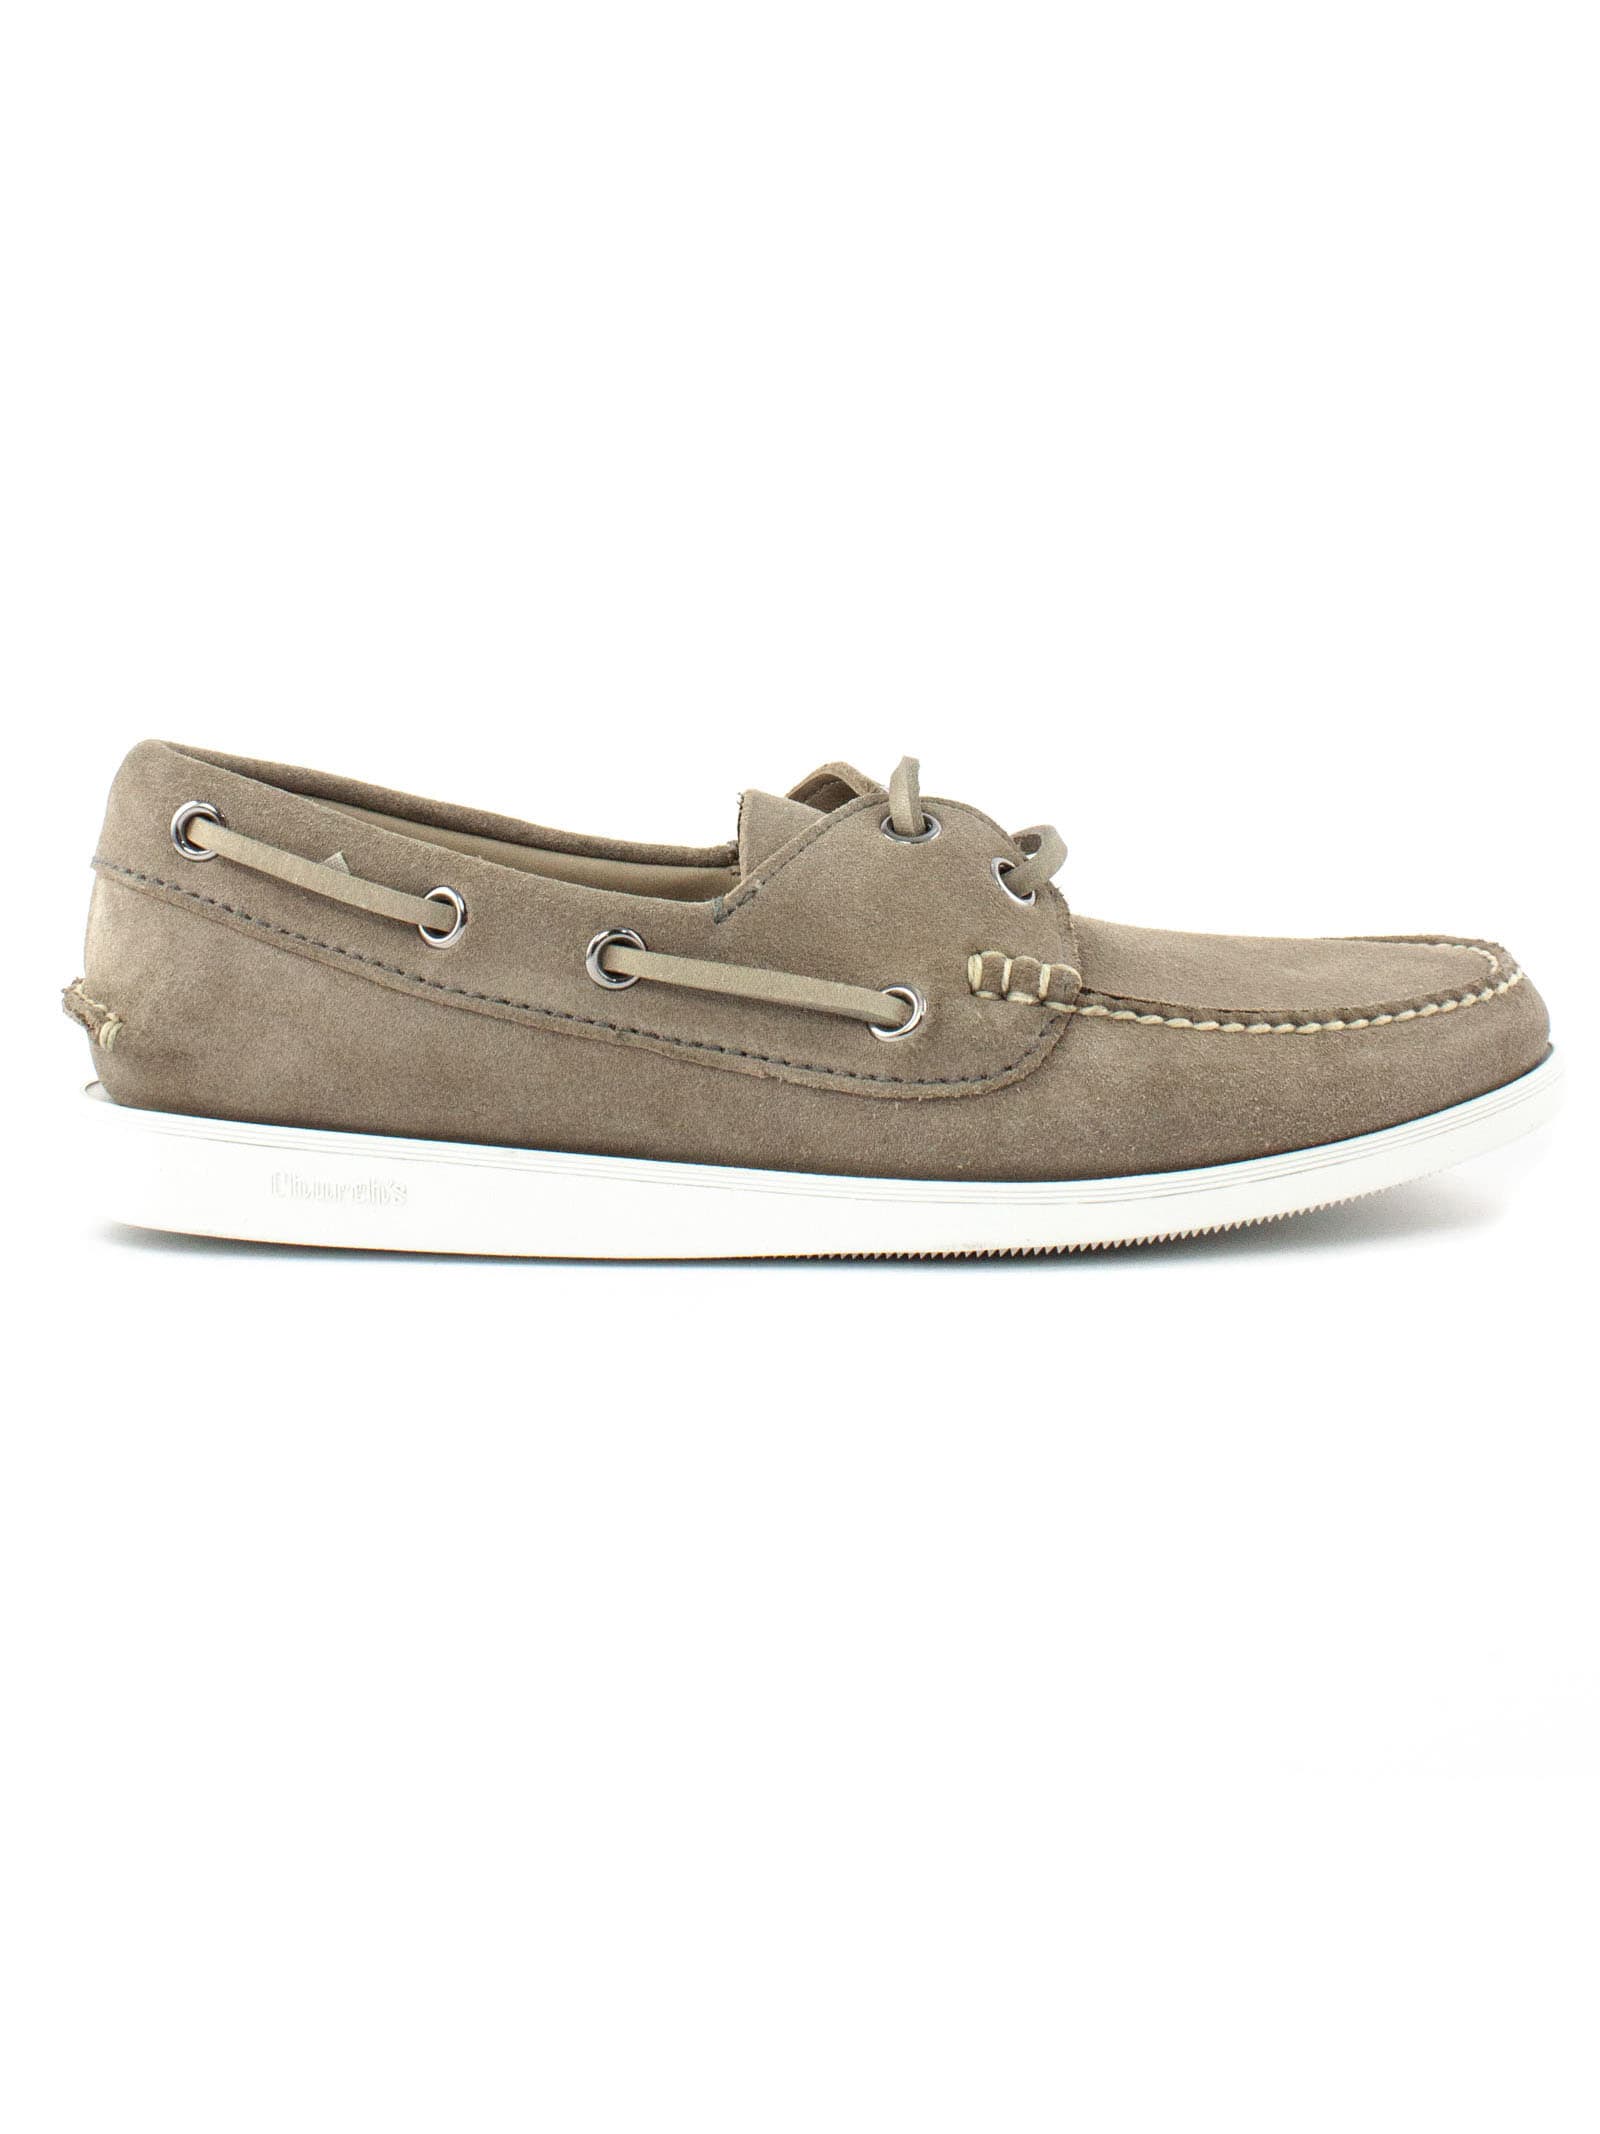 Church's STONE SUEDE BOAT SHOES